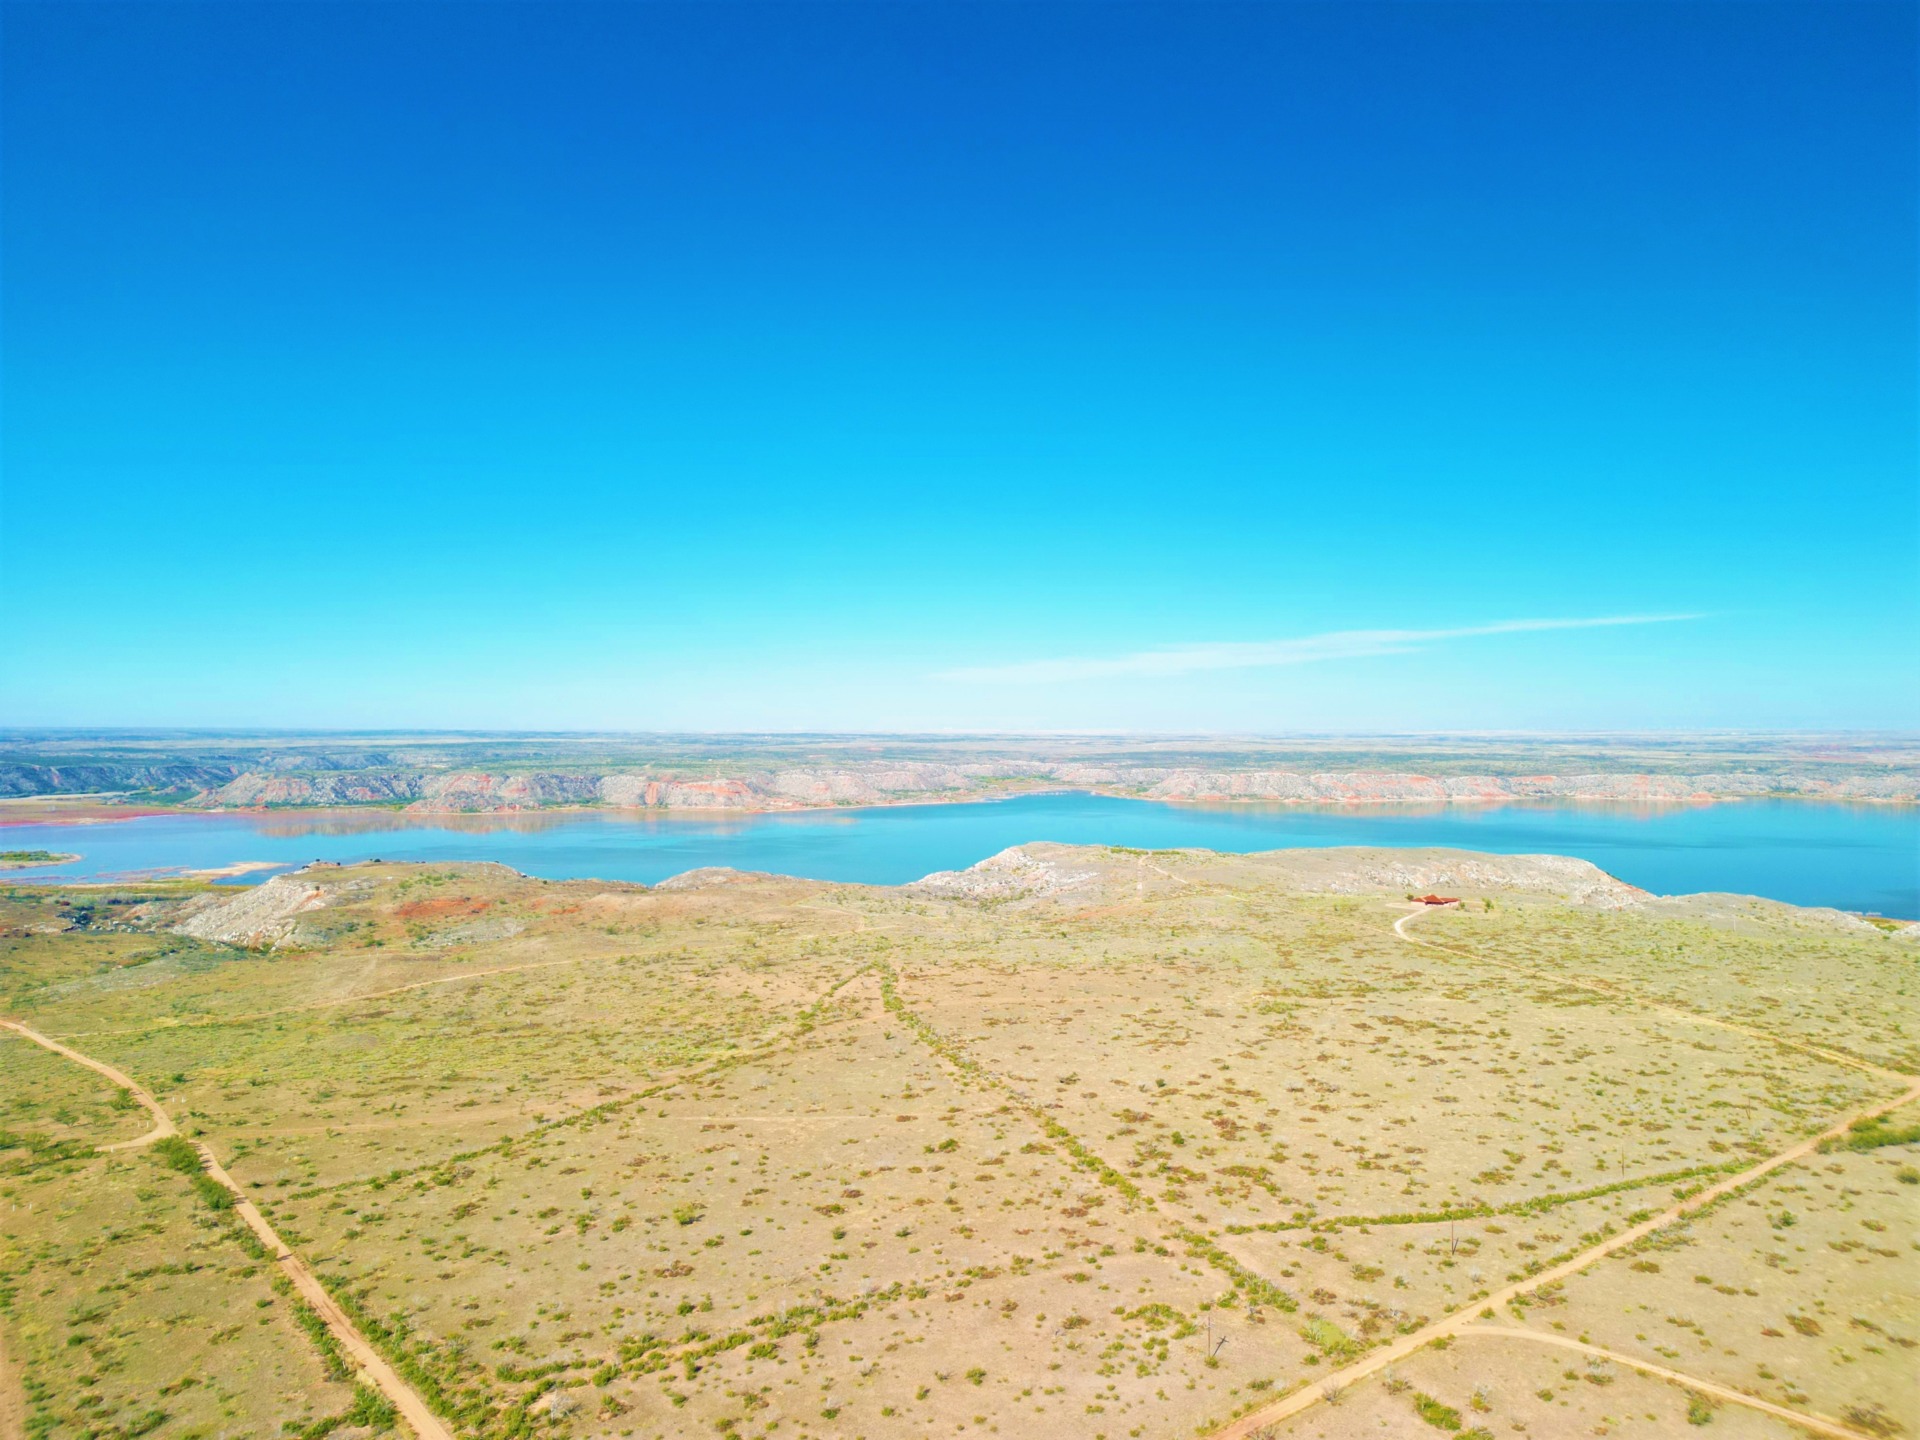 Land for Sale in Moore County 0.09 Acre RV Living Lot with Water & Power Access near Lake Meredith